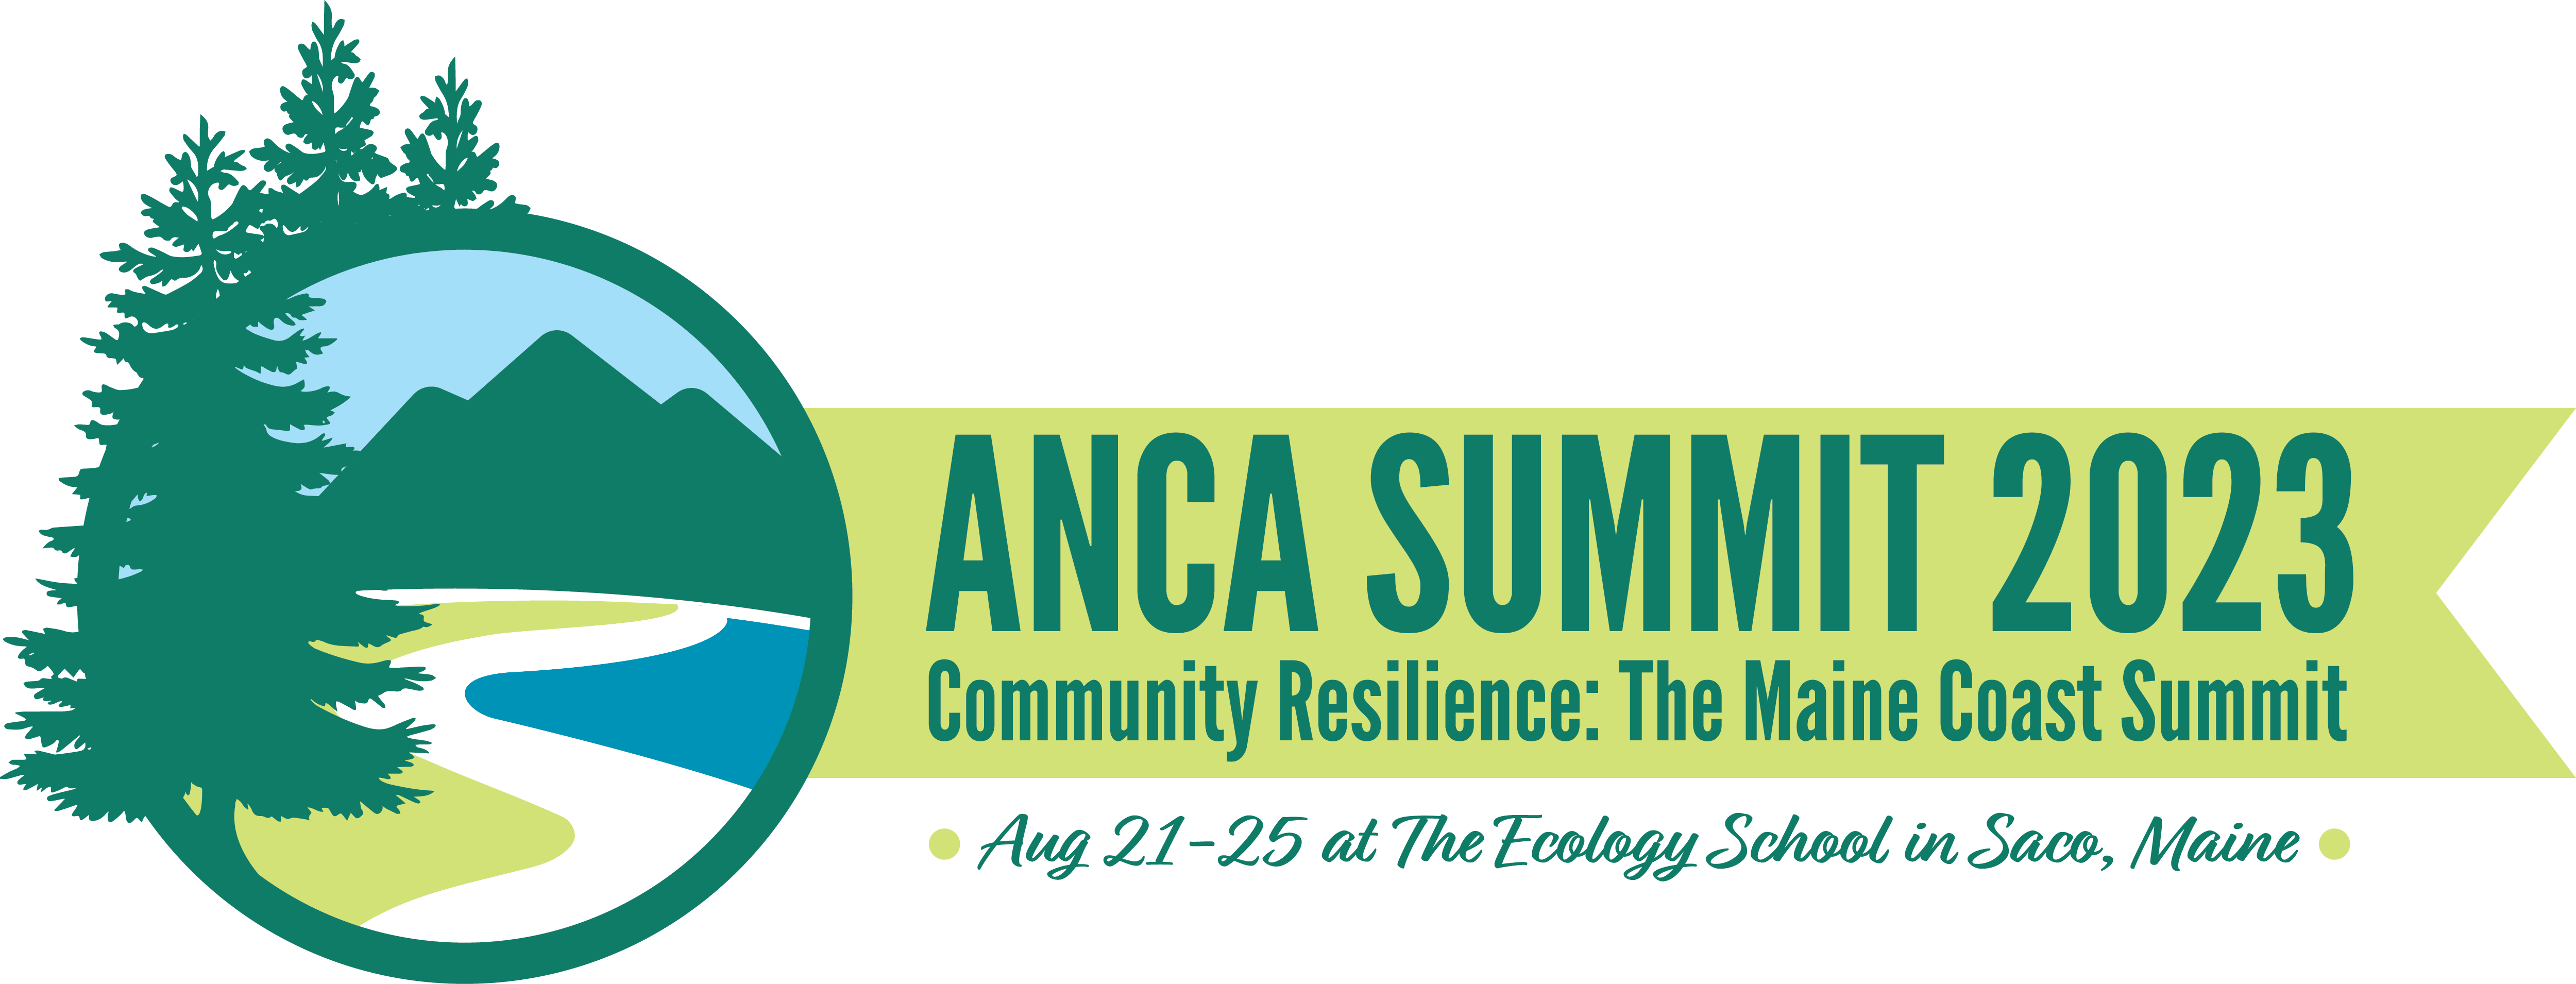 Summit logo: on the left, a green circle contains an illustration of mountains in the background and a stream leading up to them. Pine trees project up on the left side of the logo. On the right, the text: ANCA Summit 2023 / Community Solutions: The Maine Coast Summit / August 21-25 at The Ecology School in Saco, Maine.